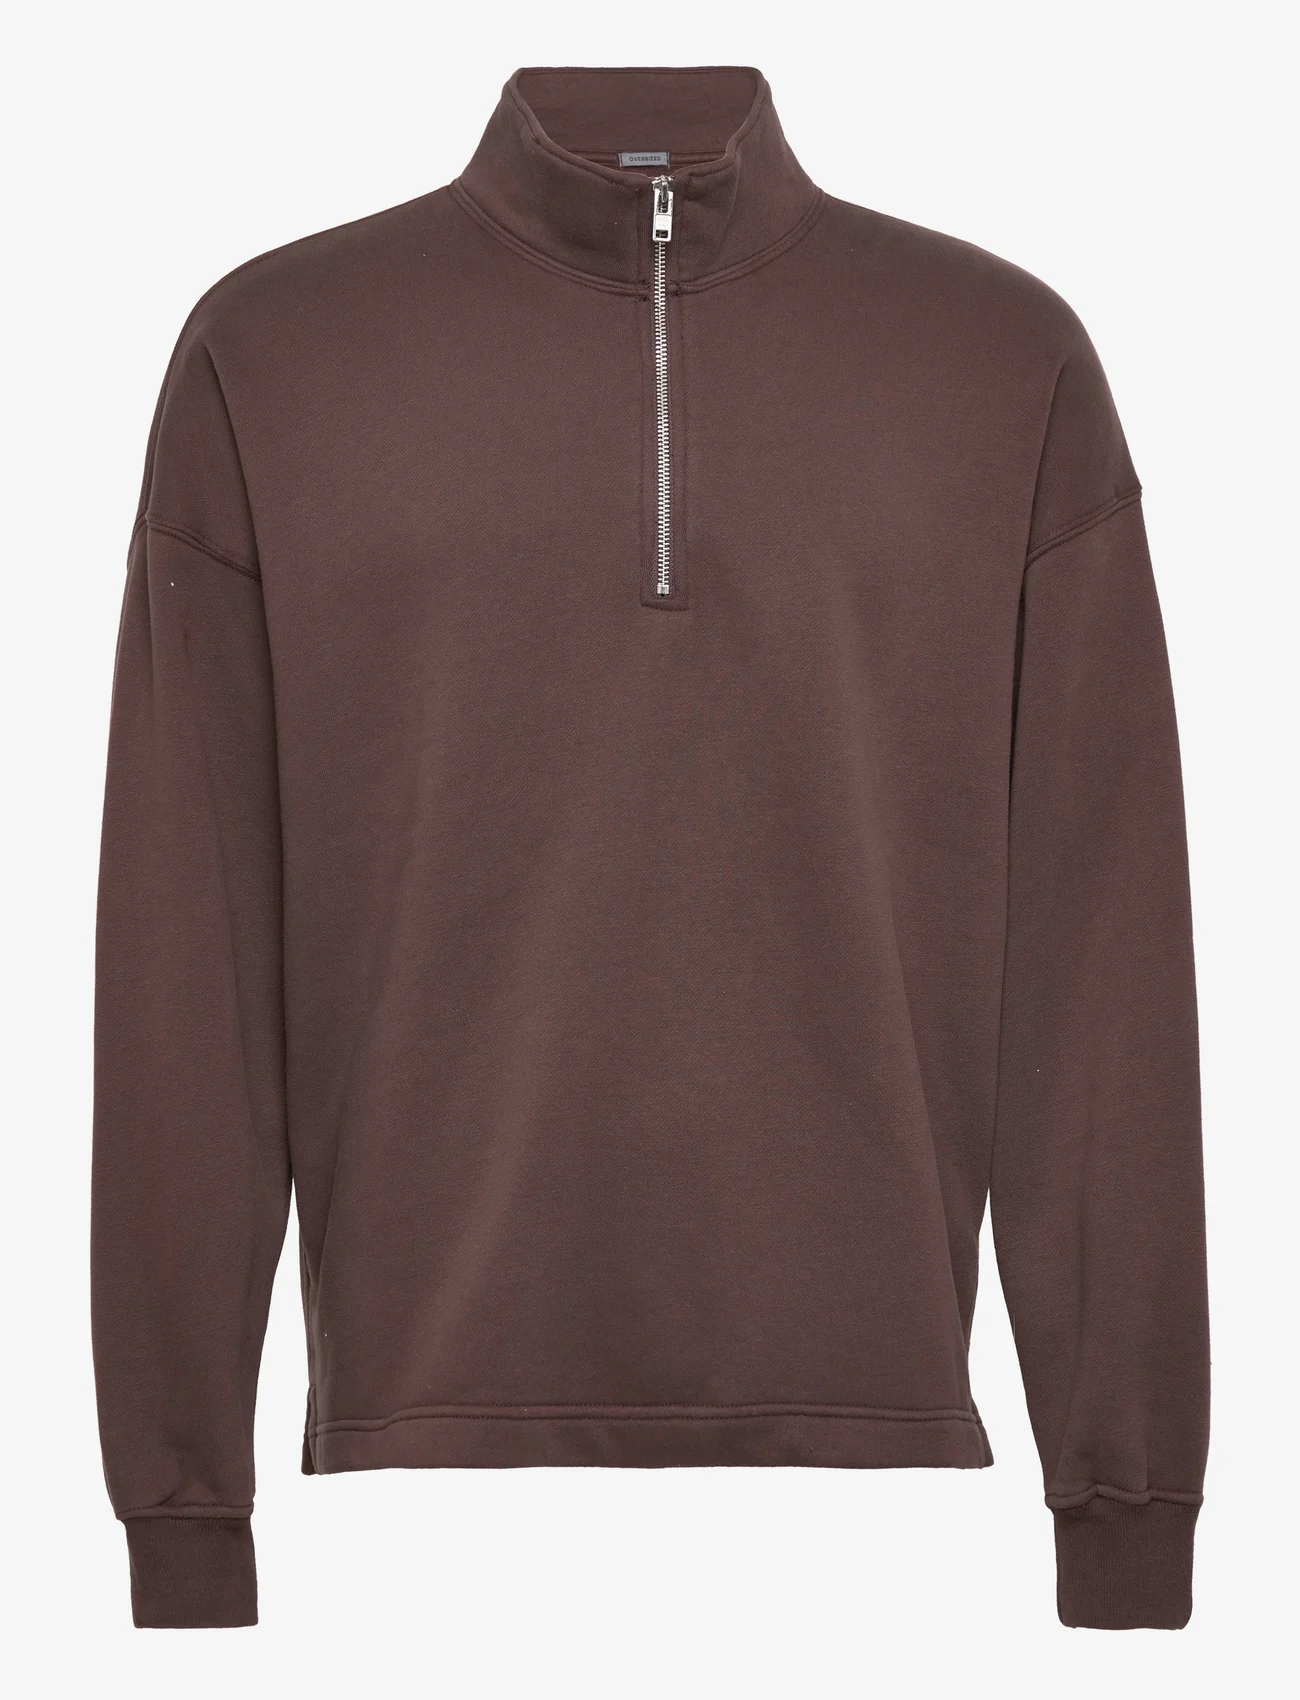 Abercrombie & Fitch - ANF MENS SWEATSHIRTS - truien - brown - 0